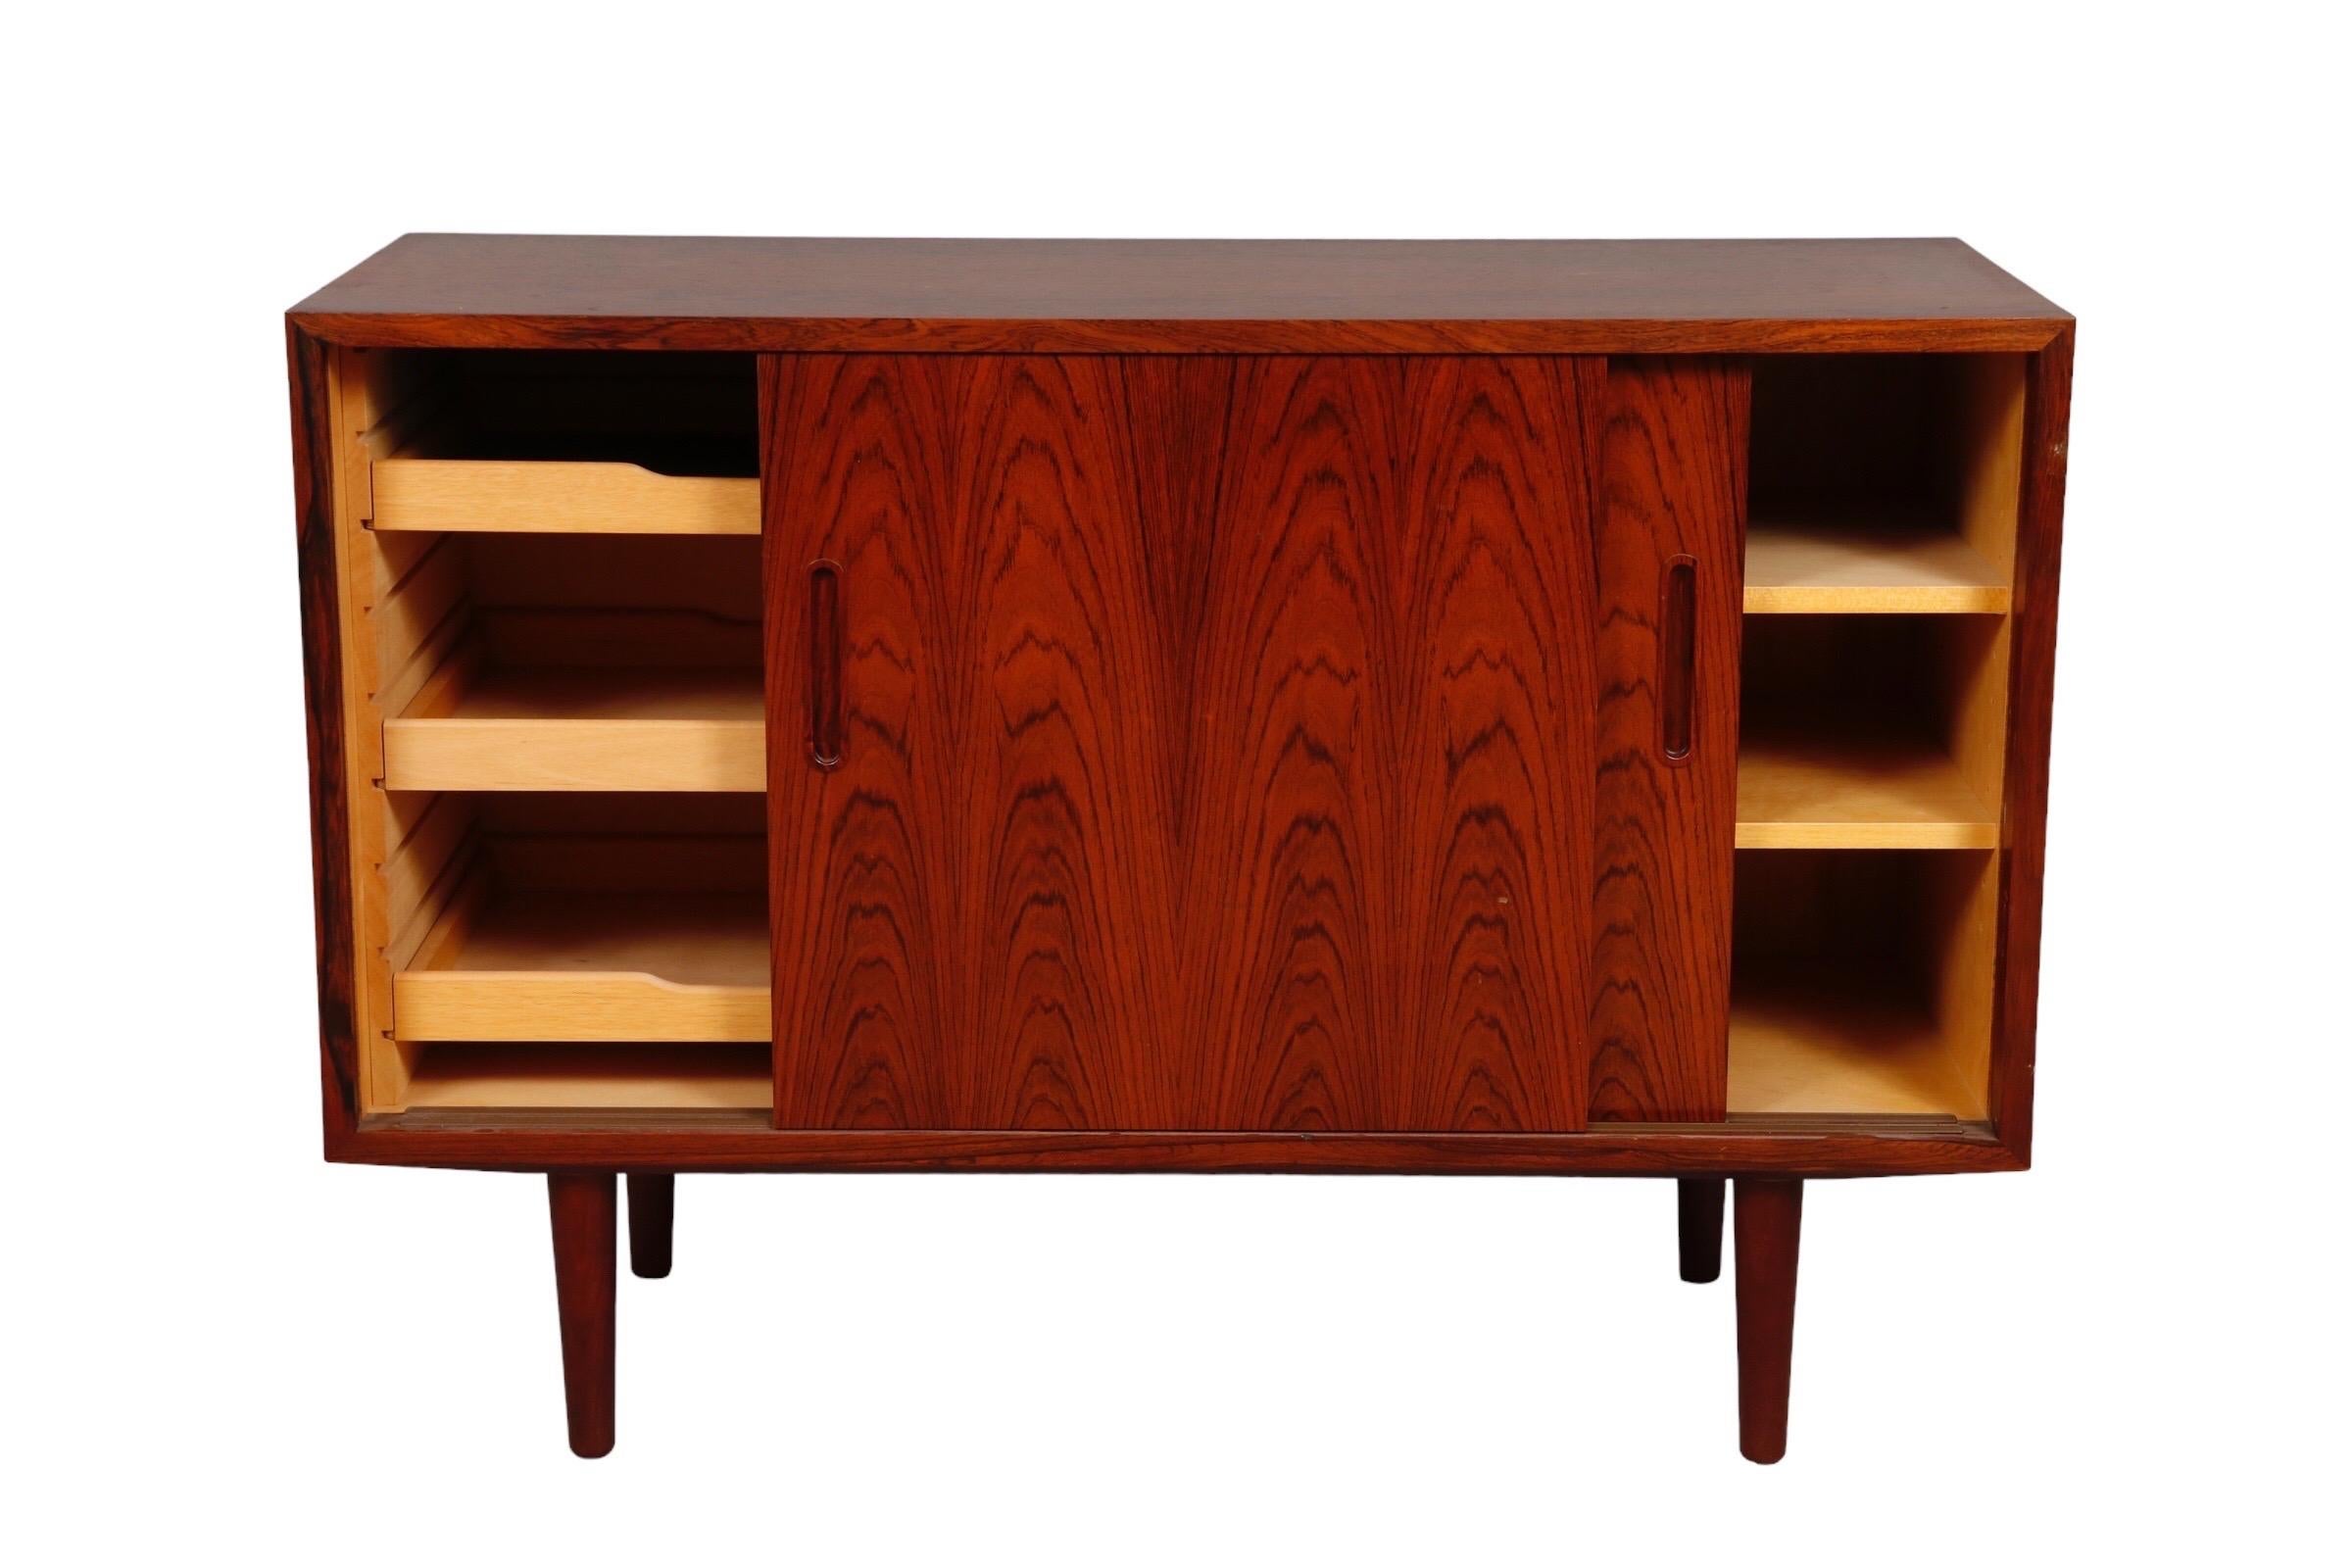 A Mid-Century Modern sideboard by Poul Hundevad. Made of beautifully grained rosewood. Bookmatched sliding doors reveal two shelves to the right and three pull out shelves to the left. Finished with round tapered legs. Marked HU Made in Denmark in